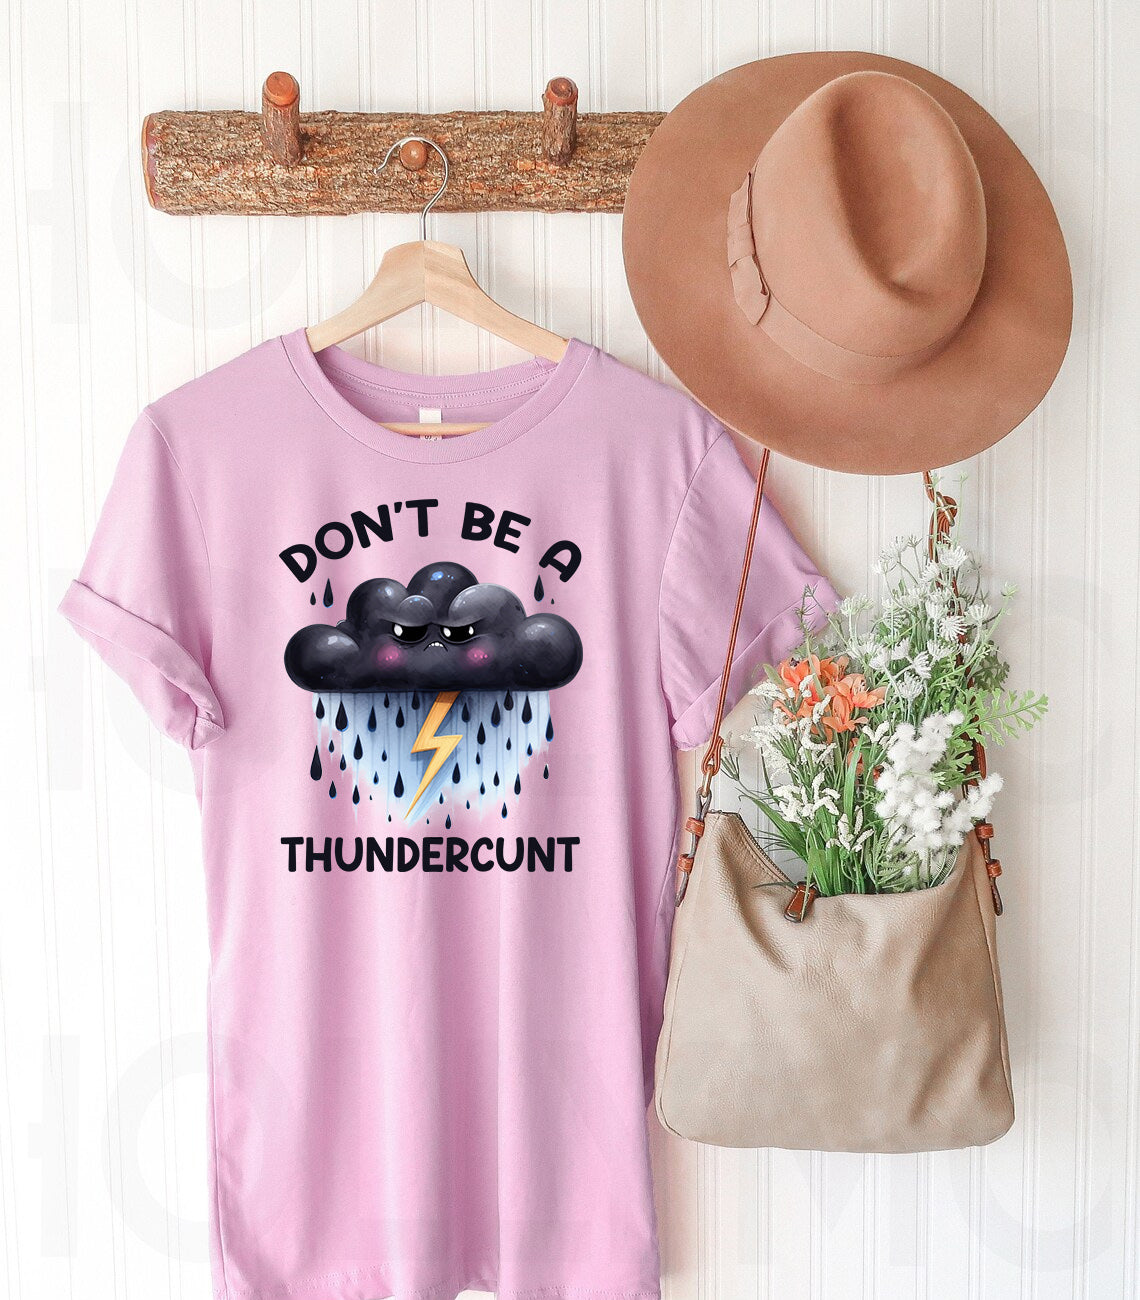 Don't Be a Thundercunt - Graphic Tee